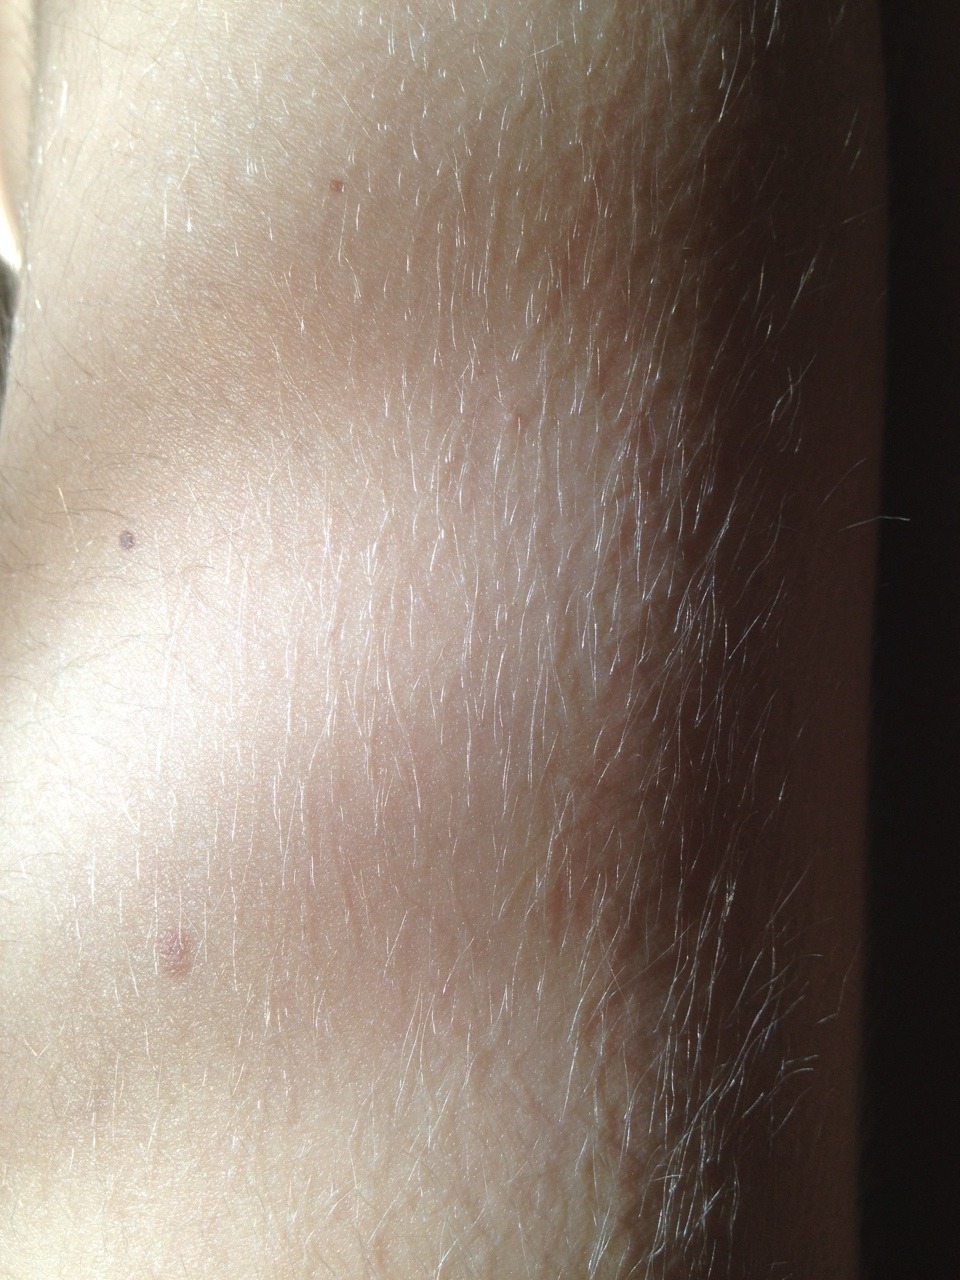 je-vois-la-lune:Body hair appreciation post bc it’s actually real cute to me and